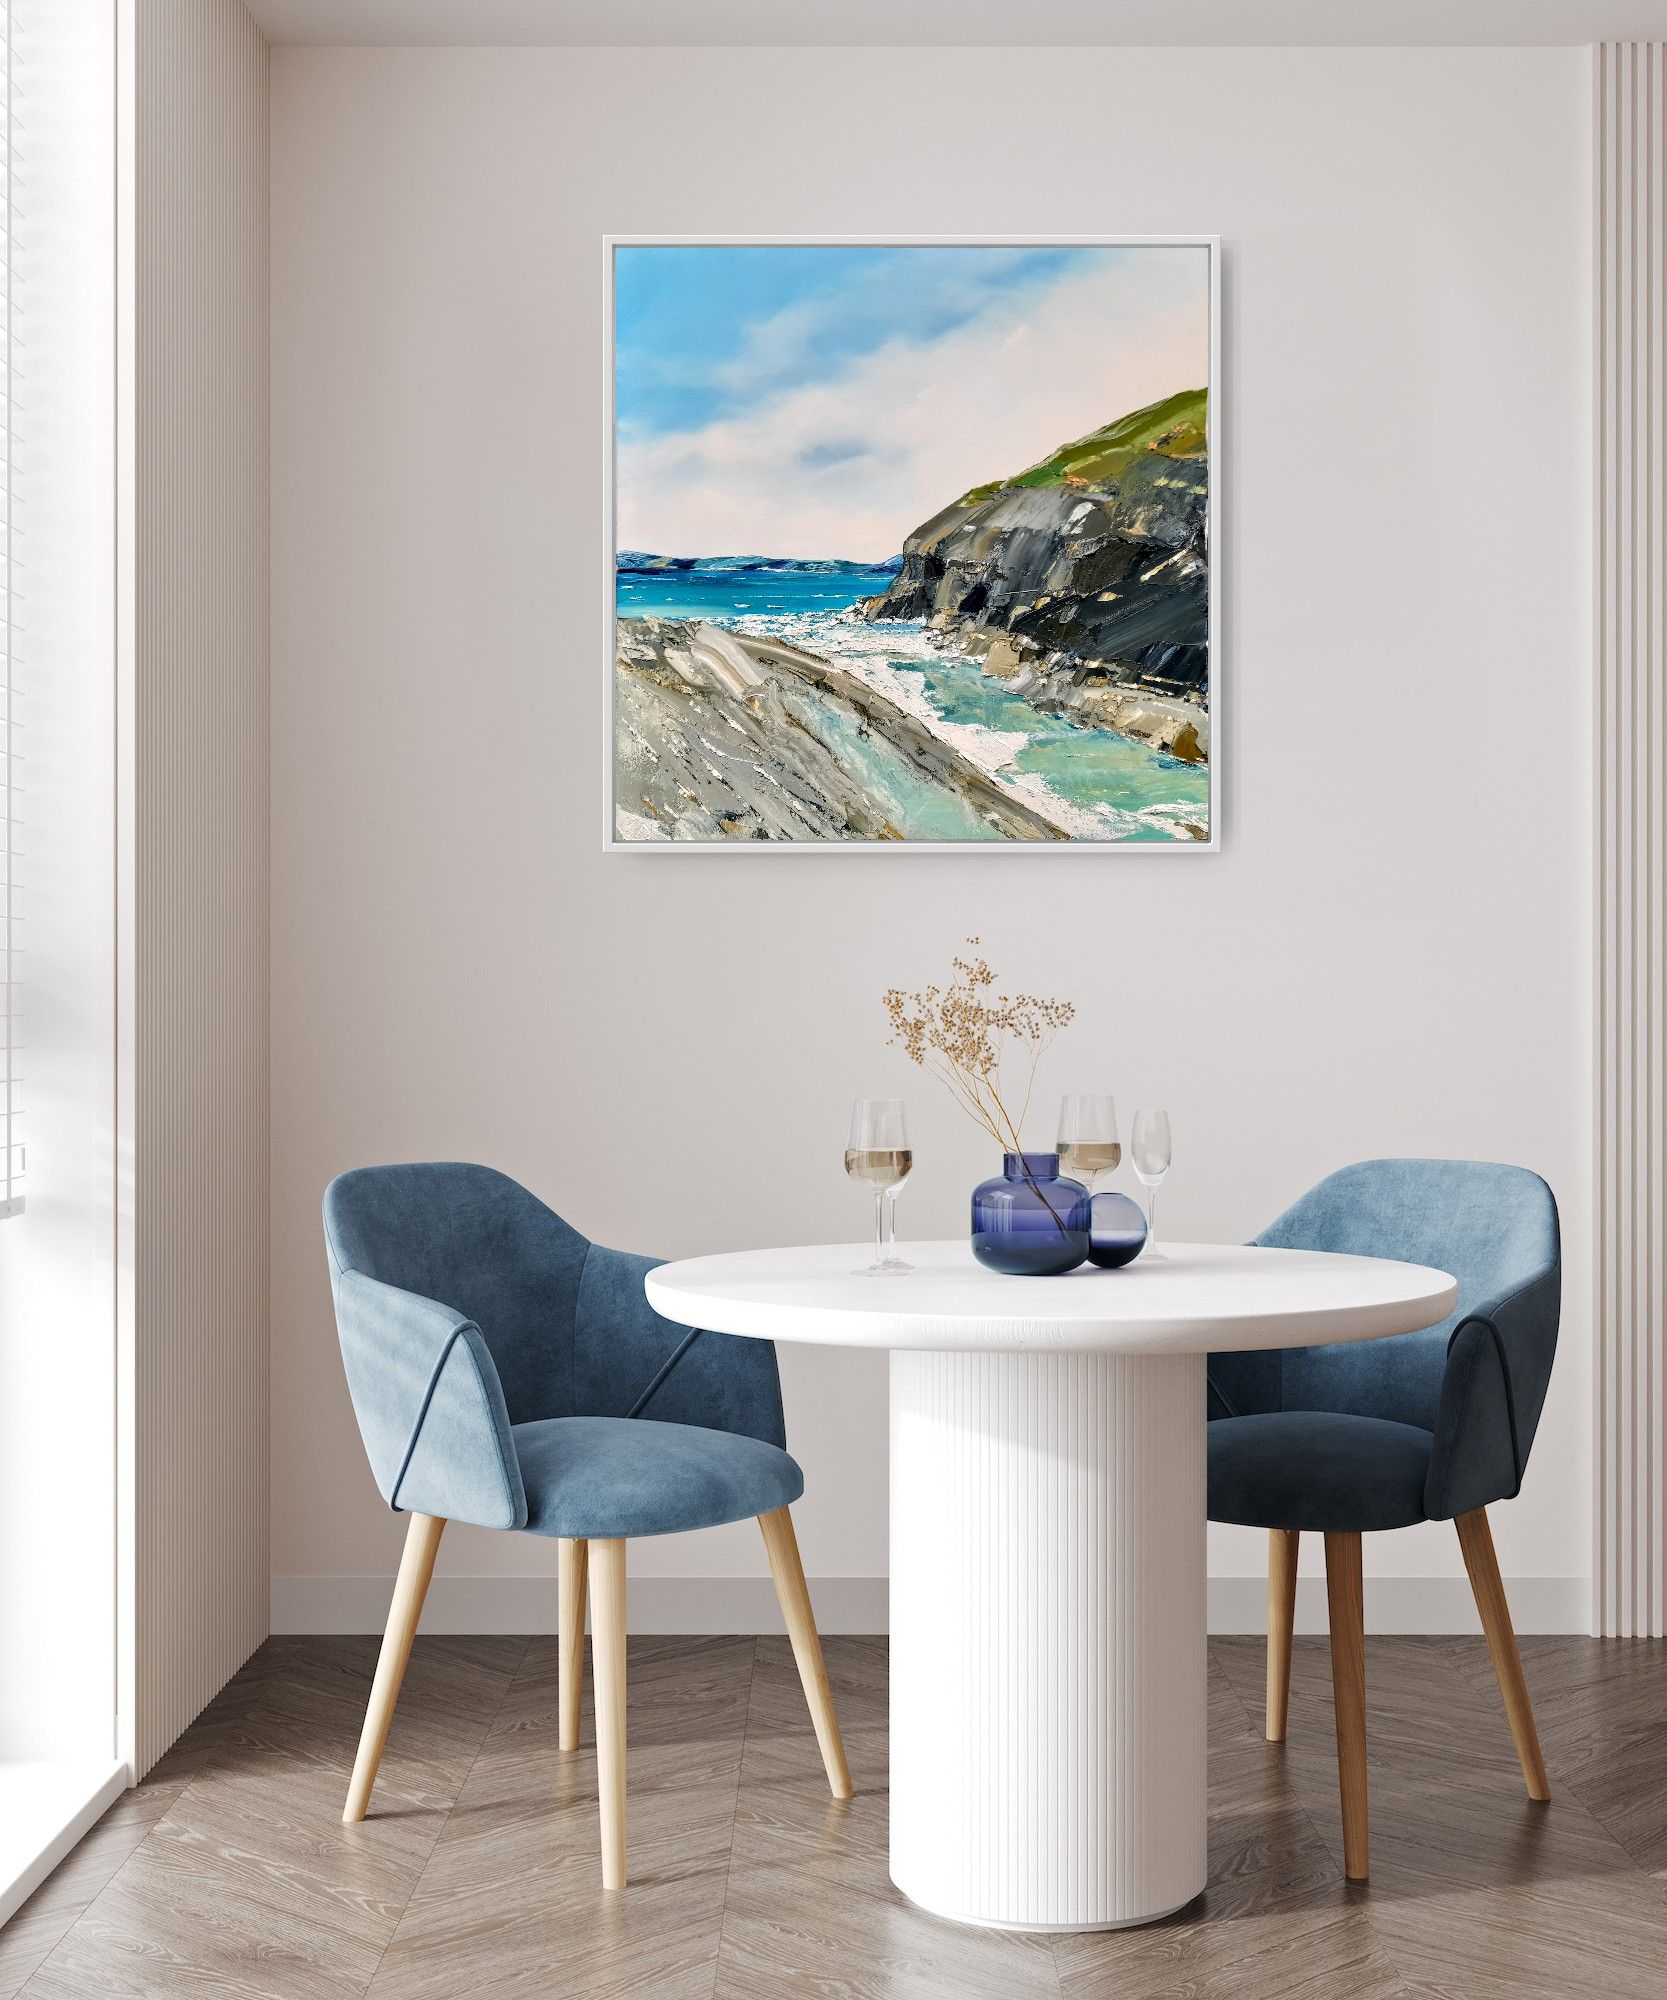 April in Aberporth, Cardigan Bay by Georgie Dowling by Georgie Dowling - Secondary Image